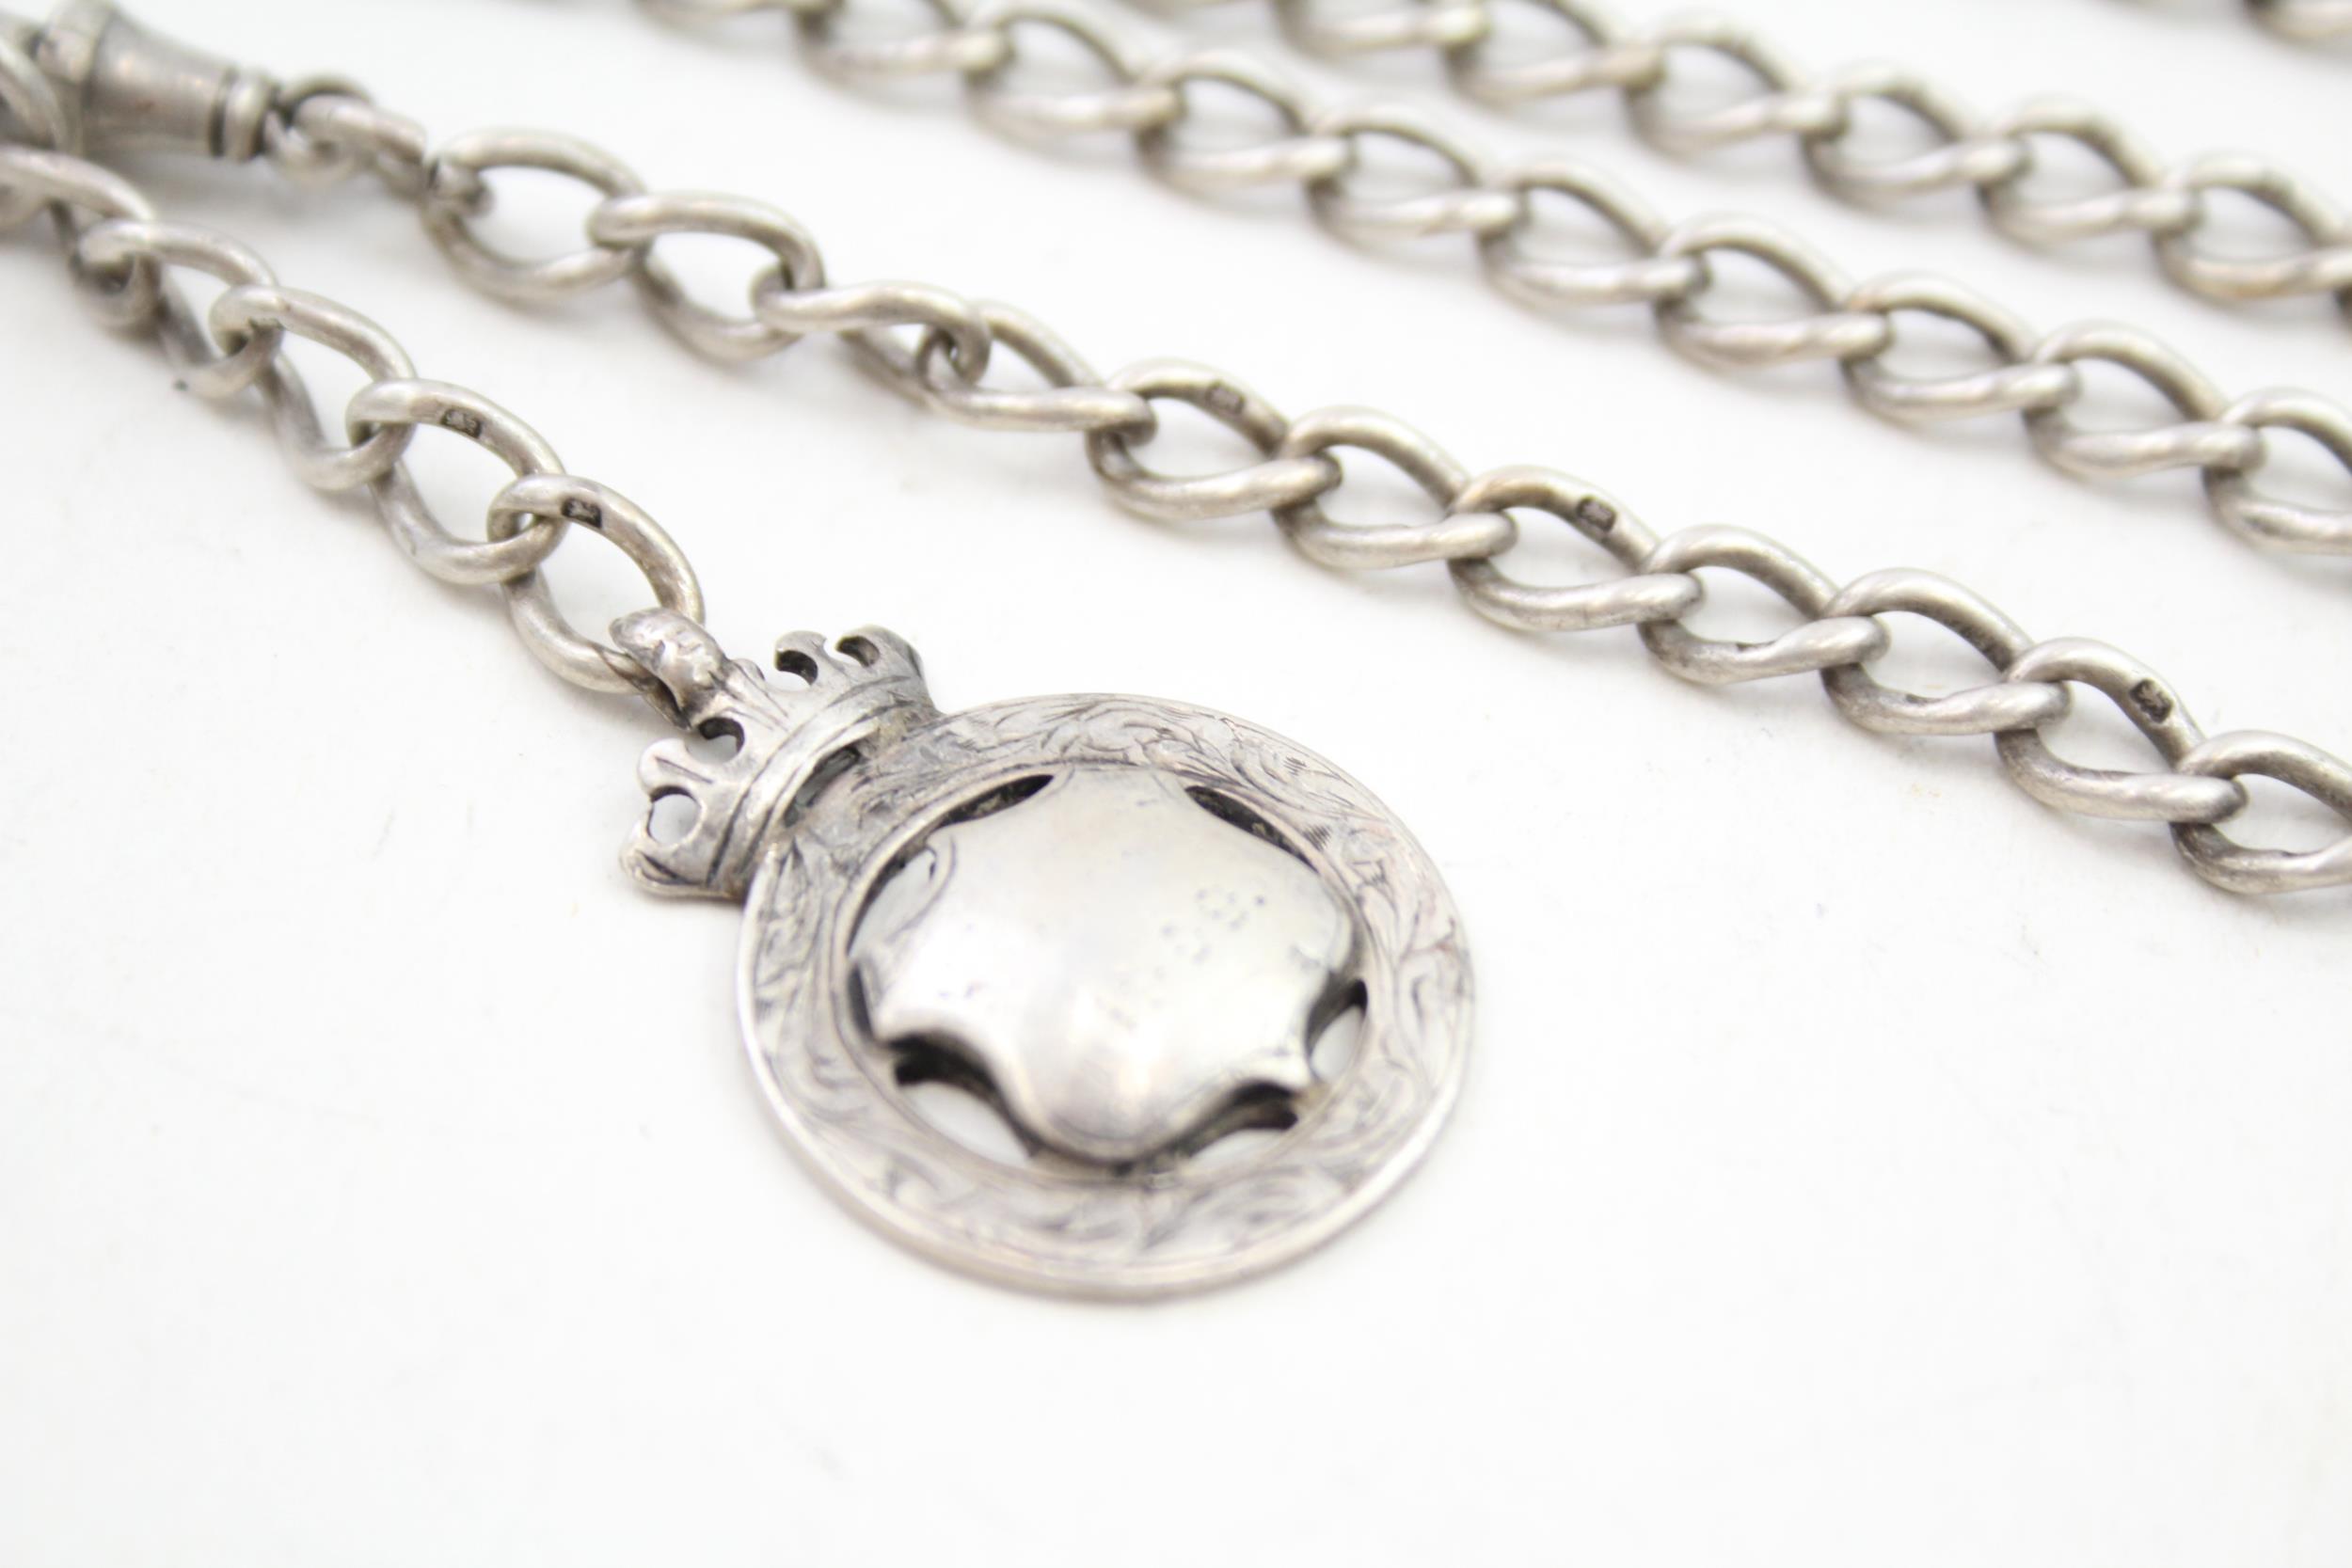 Antique Edwardian sterling silver watch chain and fob (48g) - Image 2 of 5